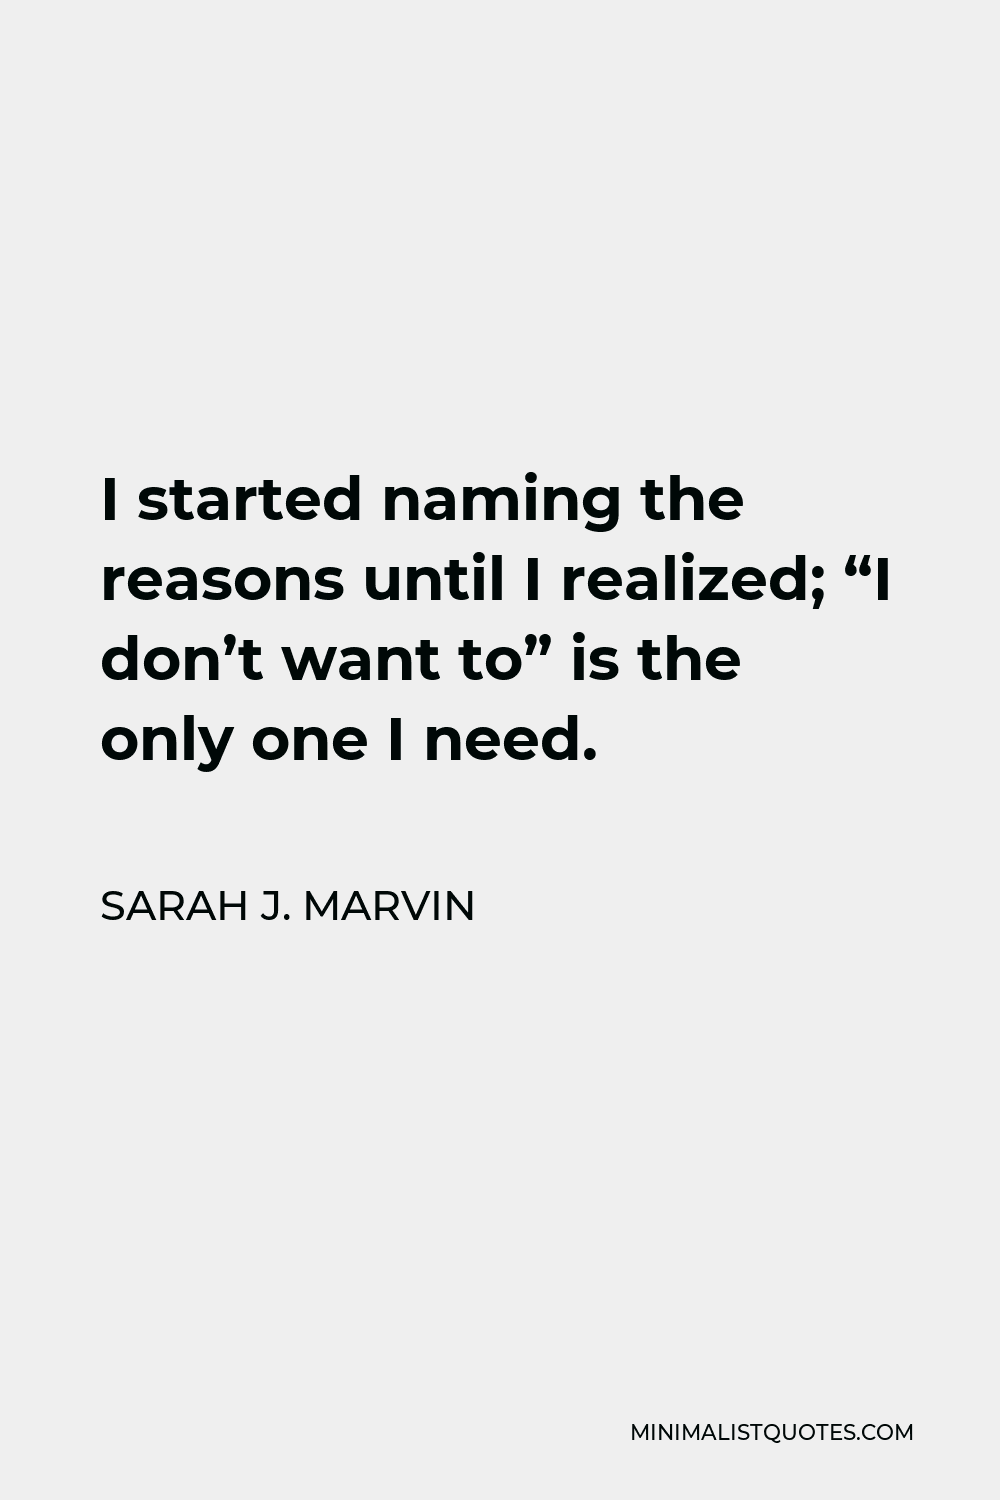 Sarah J. Marvin Quote - I started naming the reasons, until I realized; “I don’t want to” is the only one I need.